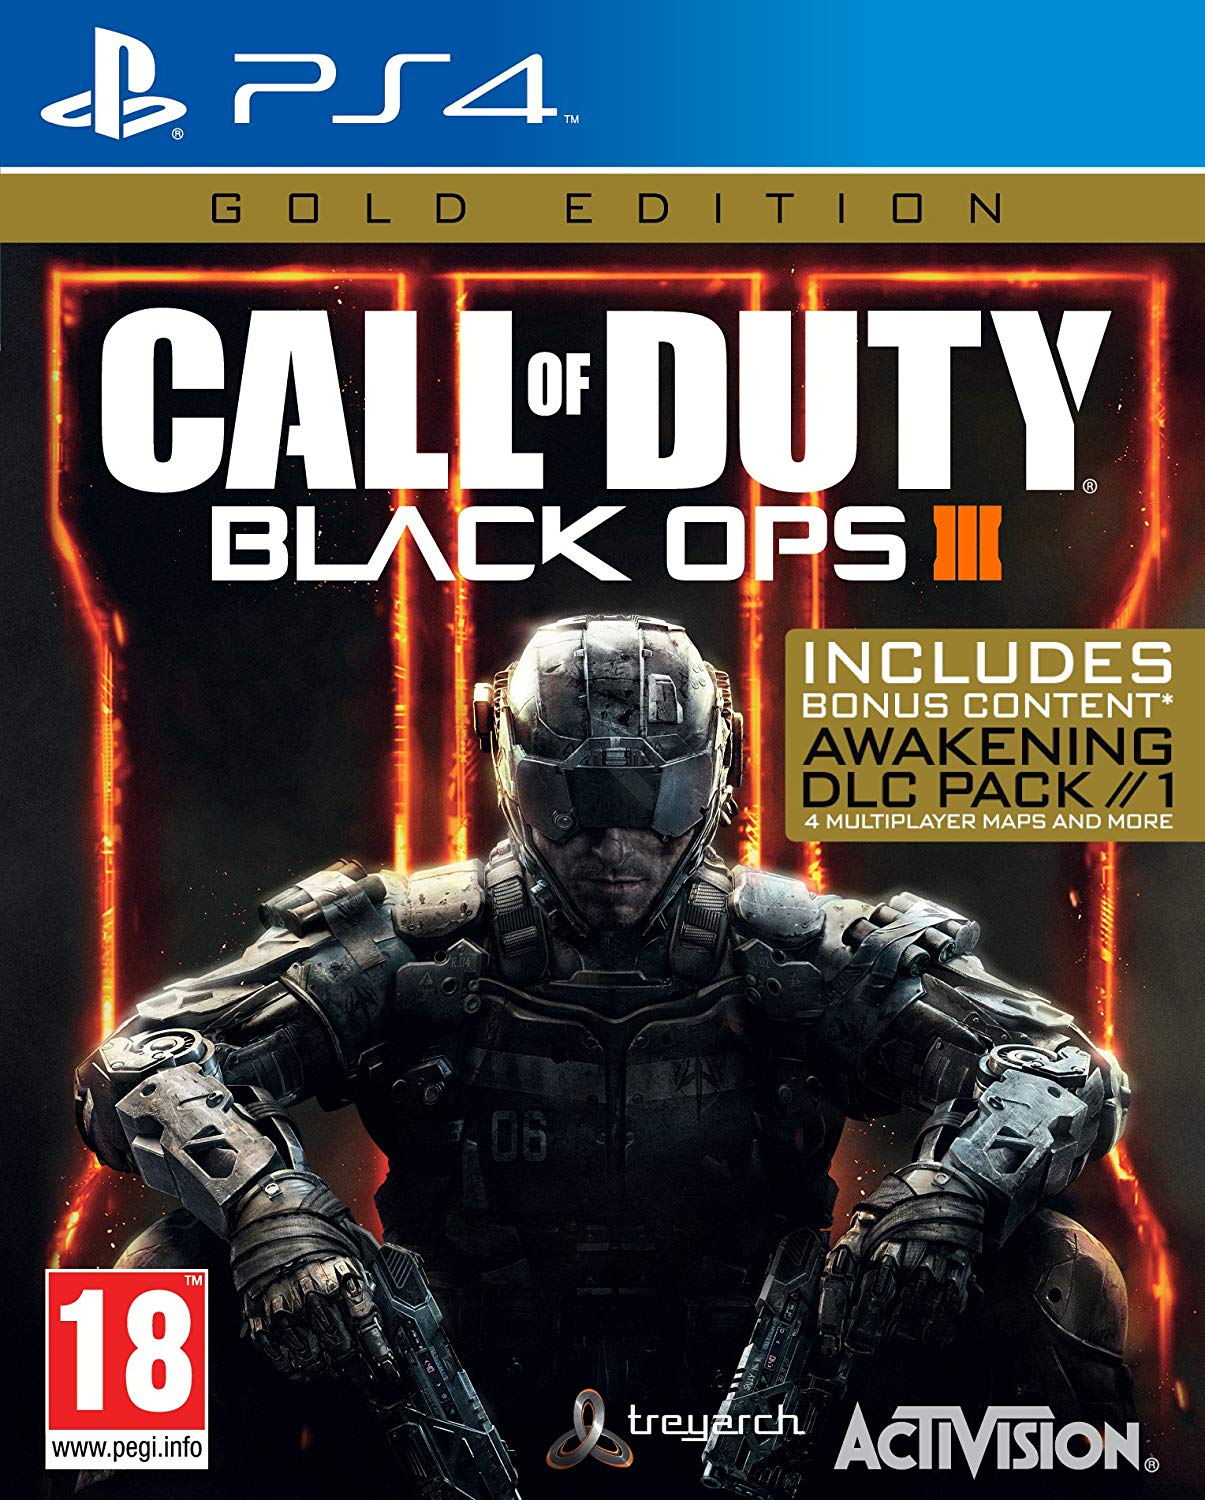 Call of Duty: Black Ops III (3) – Gold Edition (ENG)